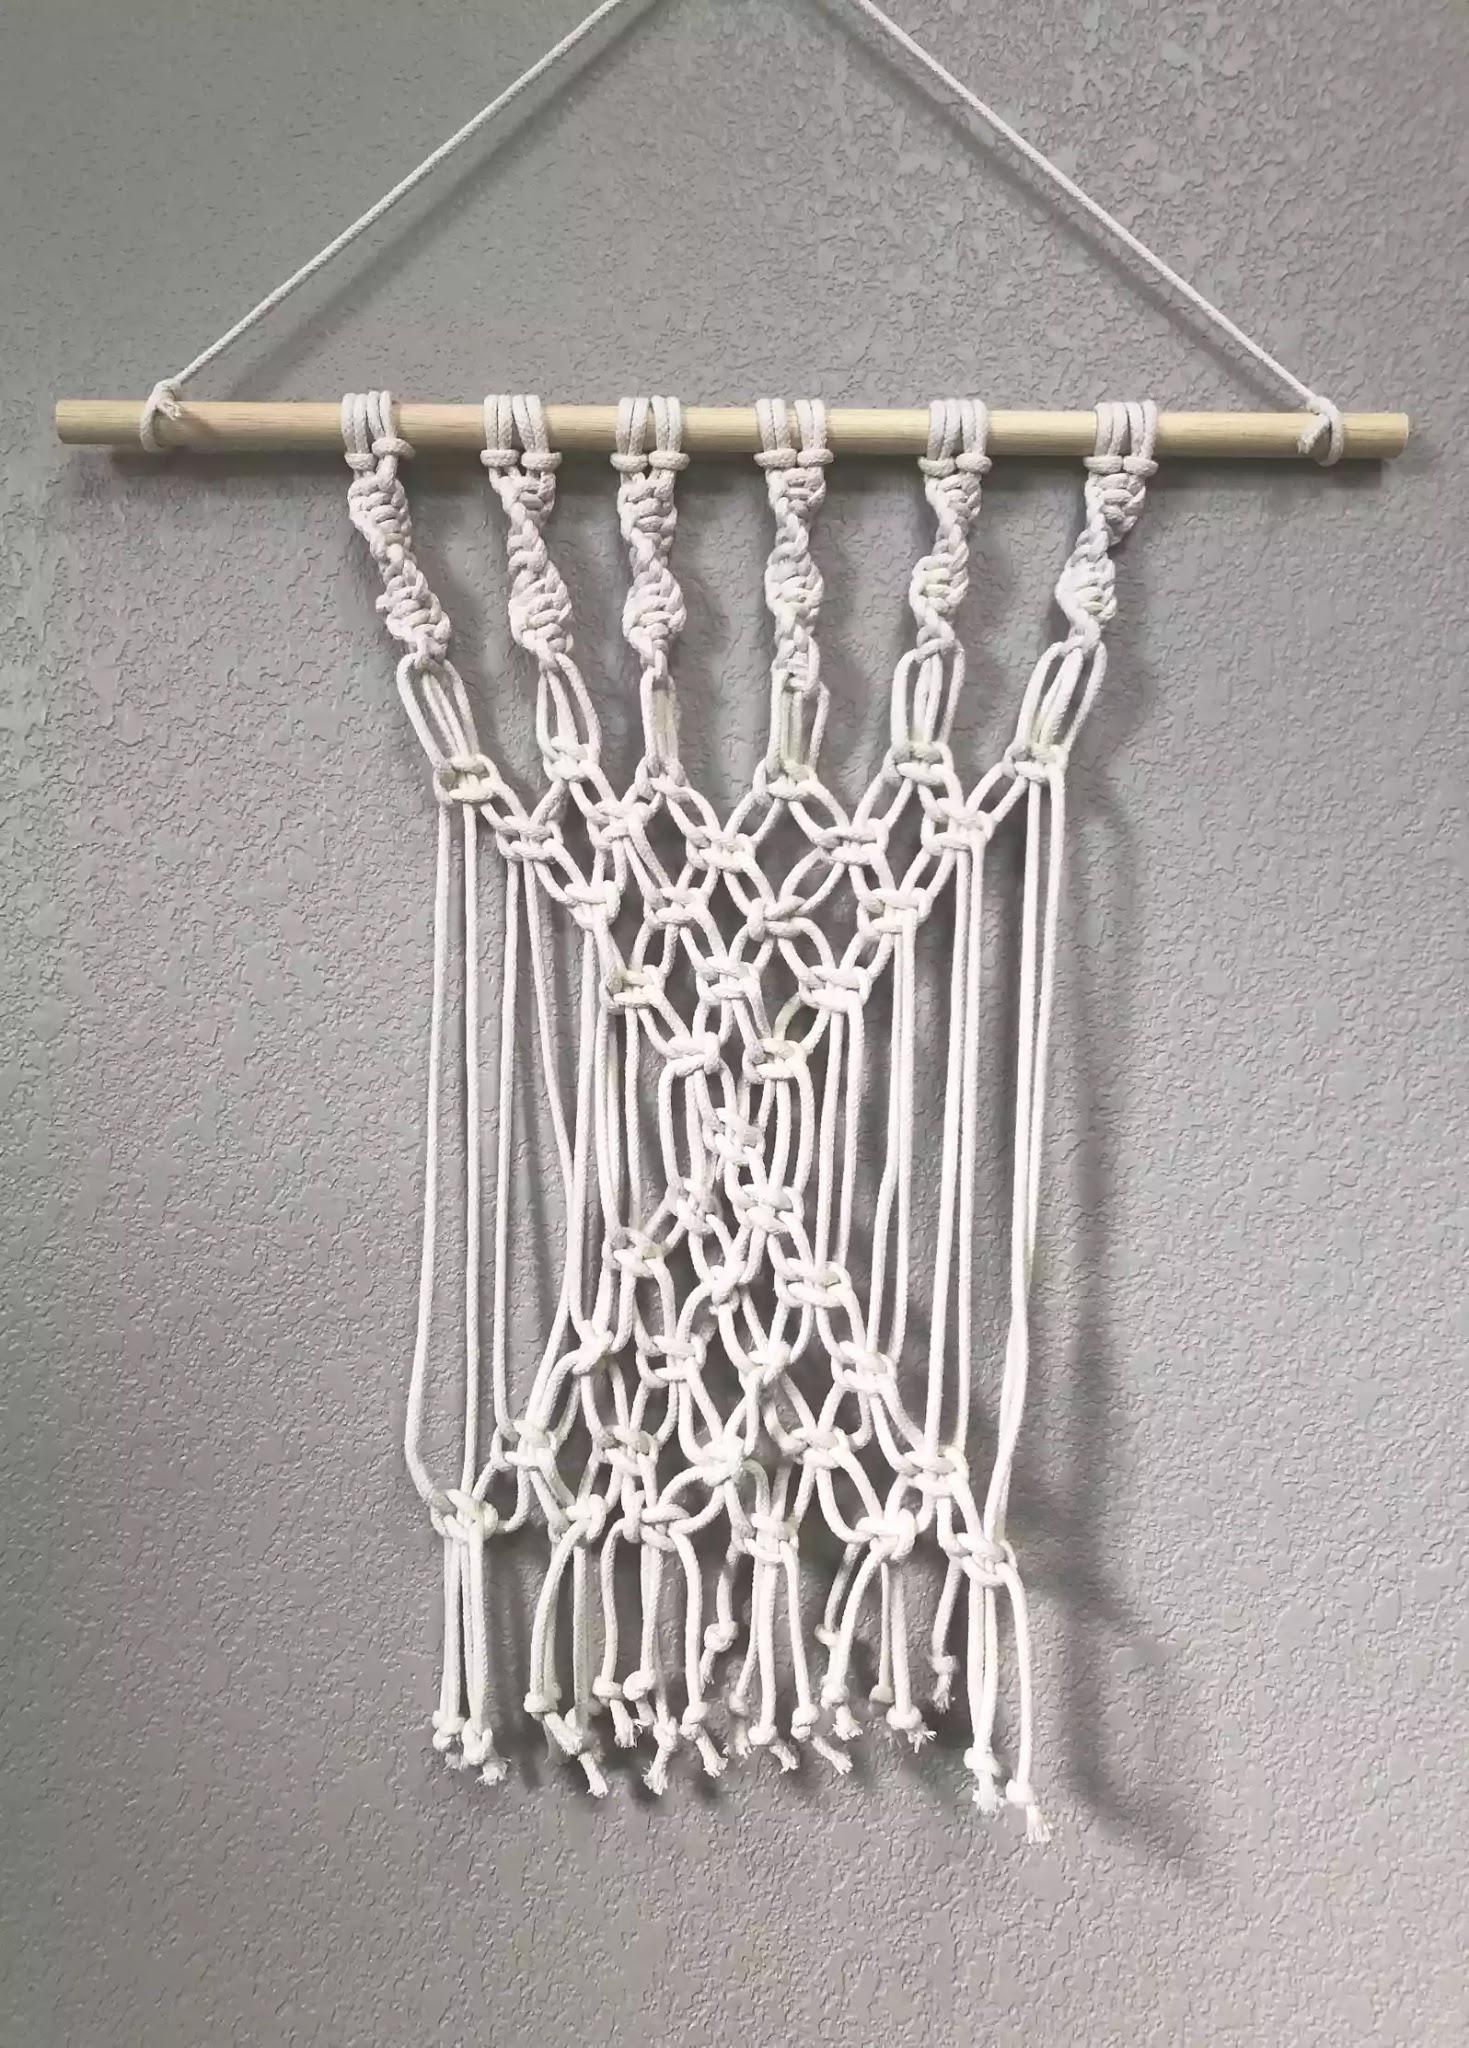 Easy Macrame Wall Hanging With Basic Macrame Knots